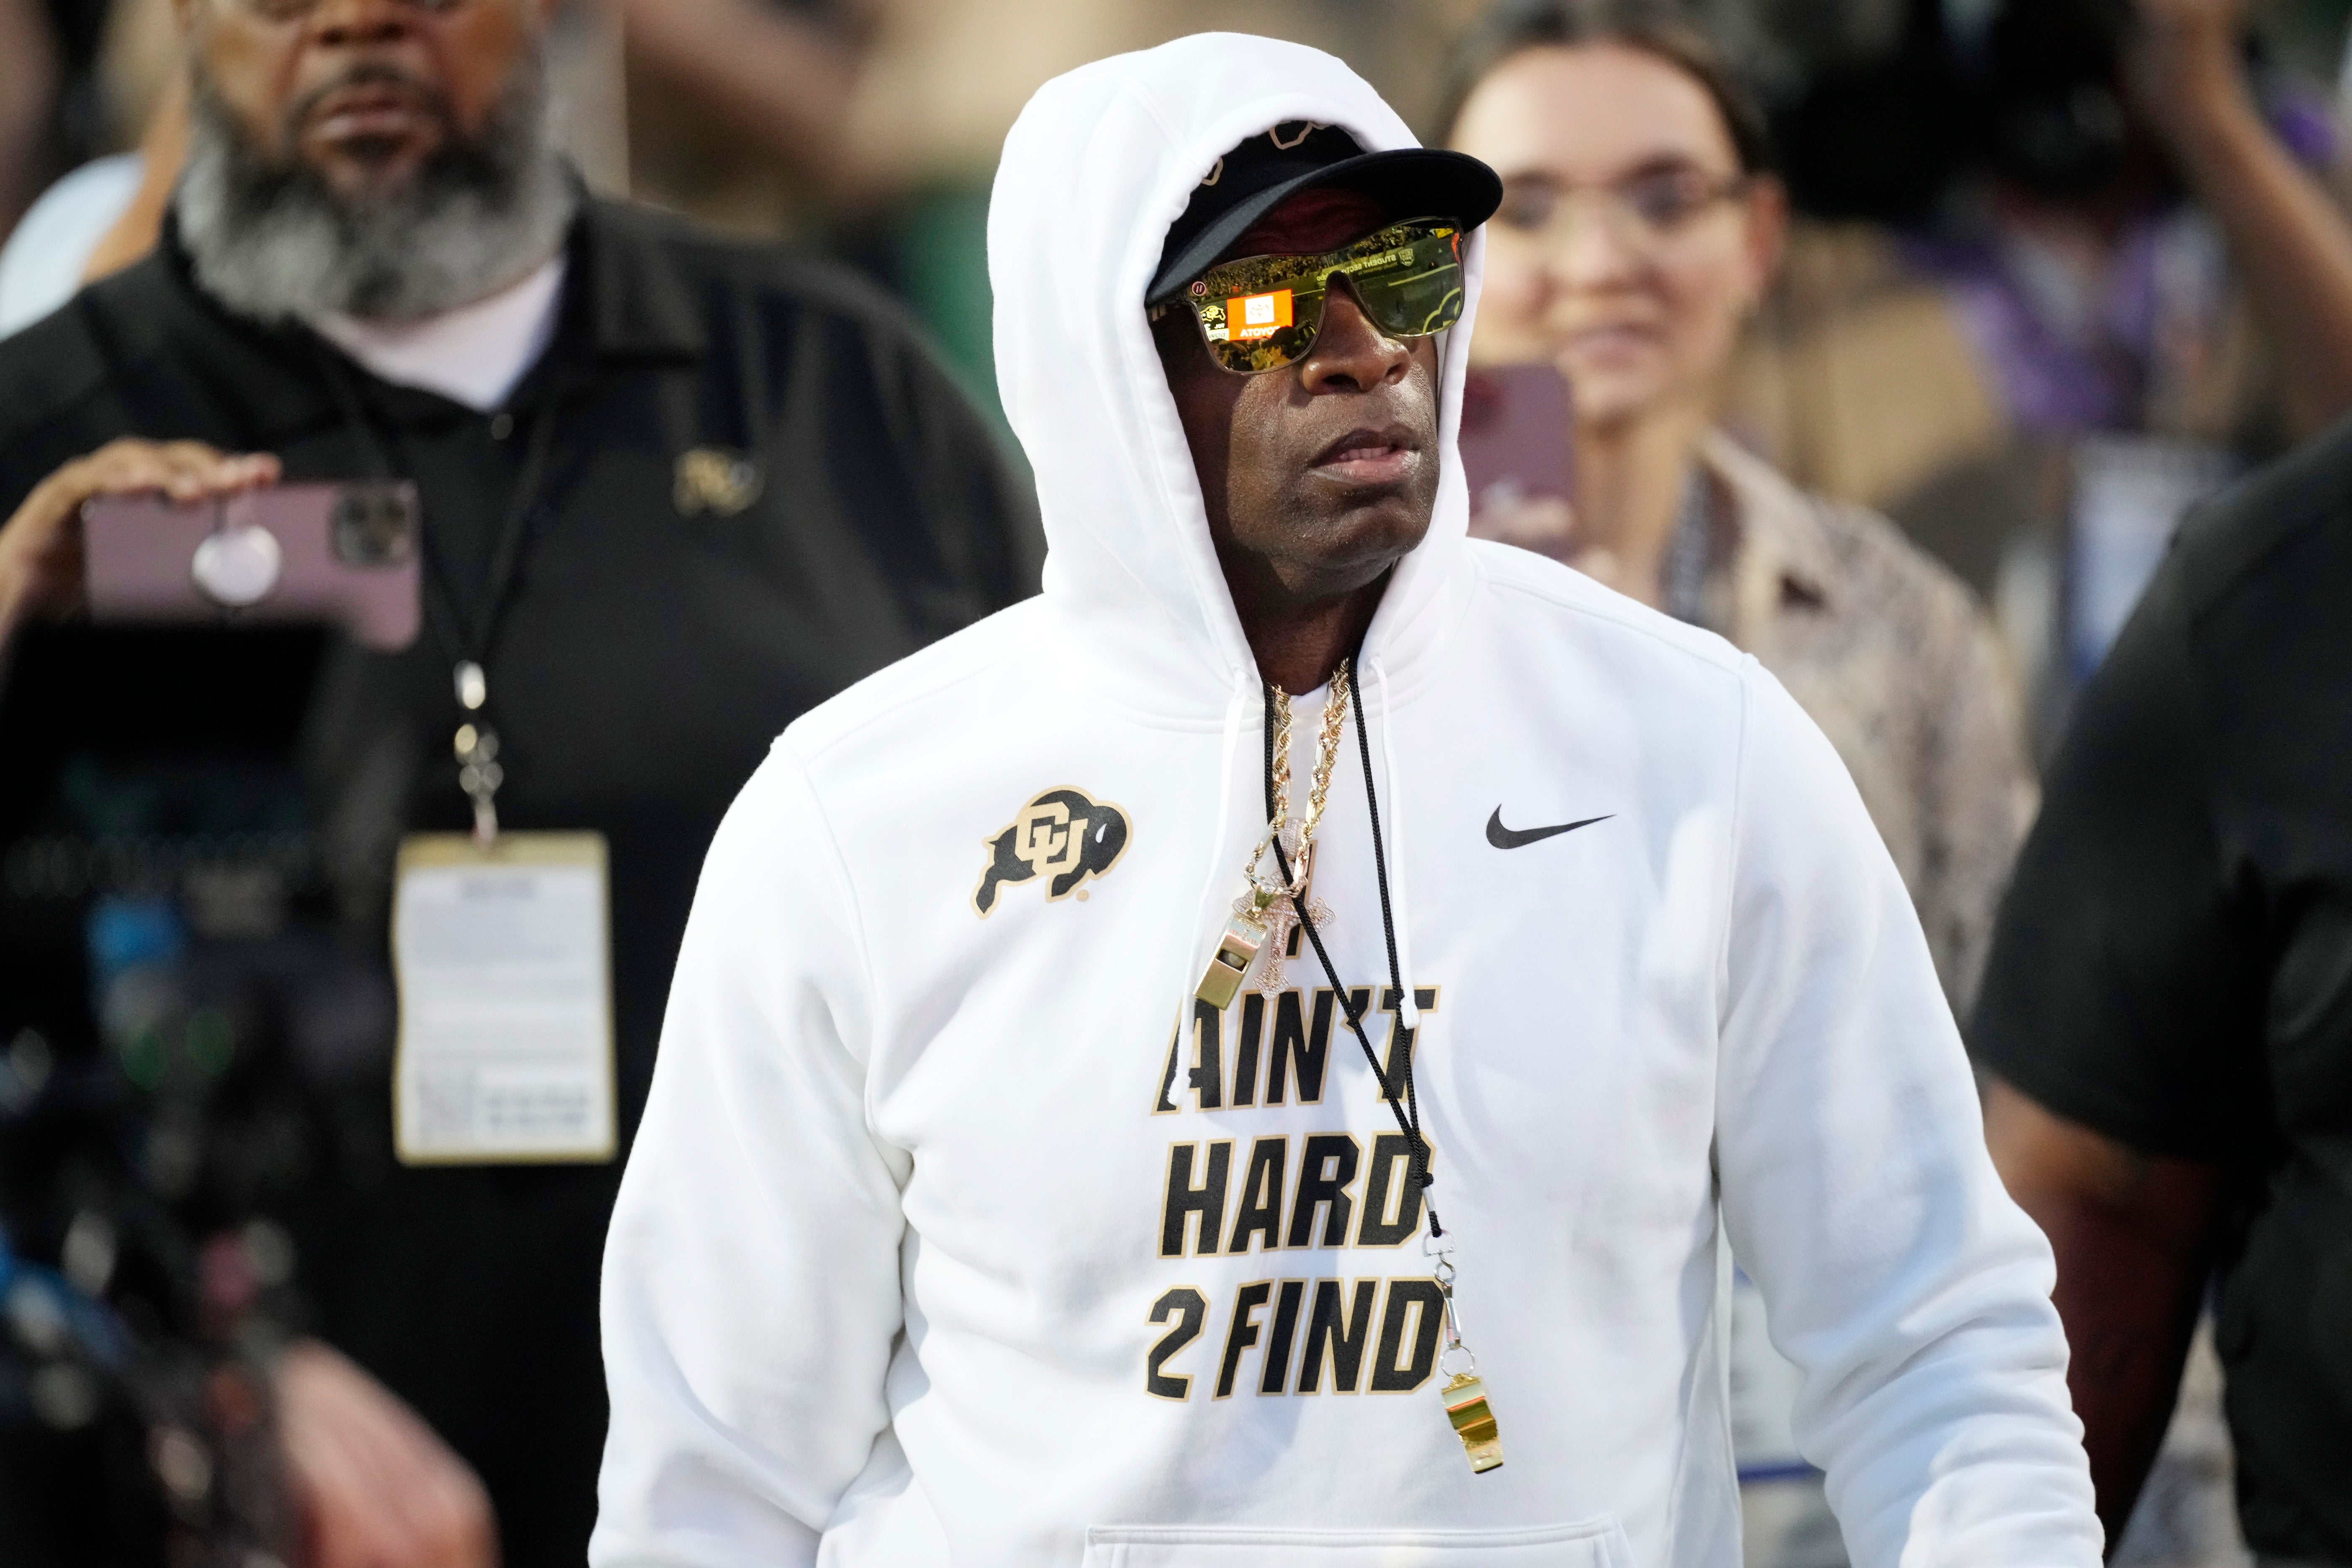 Deion Sanders impact at Colorado raises hopes other Black coaches will get opportunities The Independent